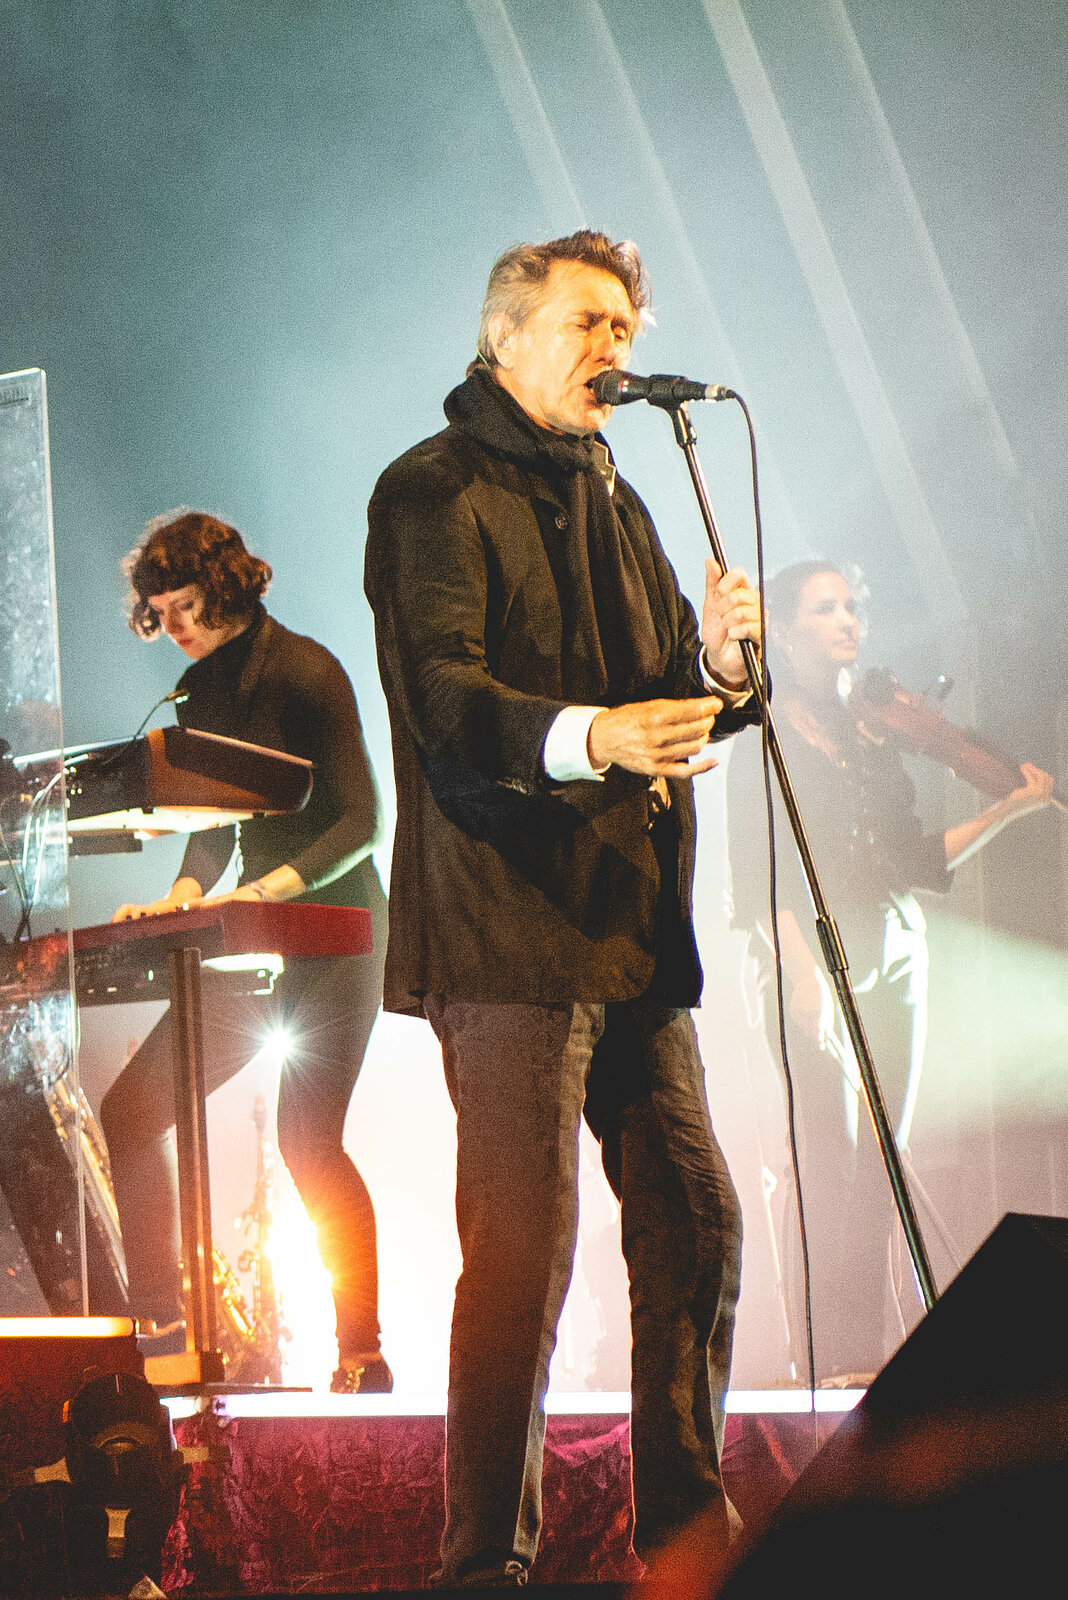 Bryan Ferry at Standon Calling Festival, July 2018